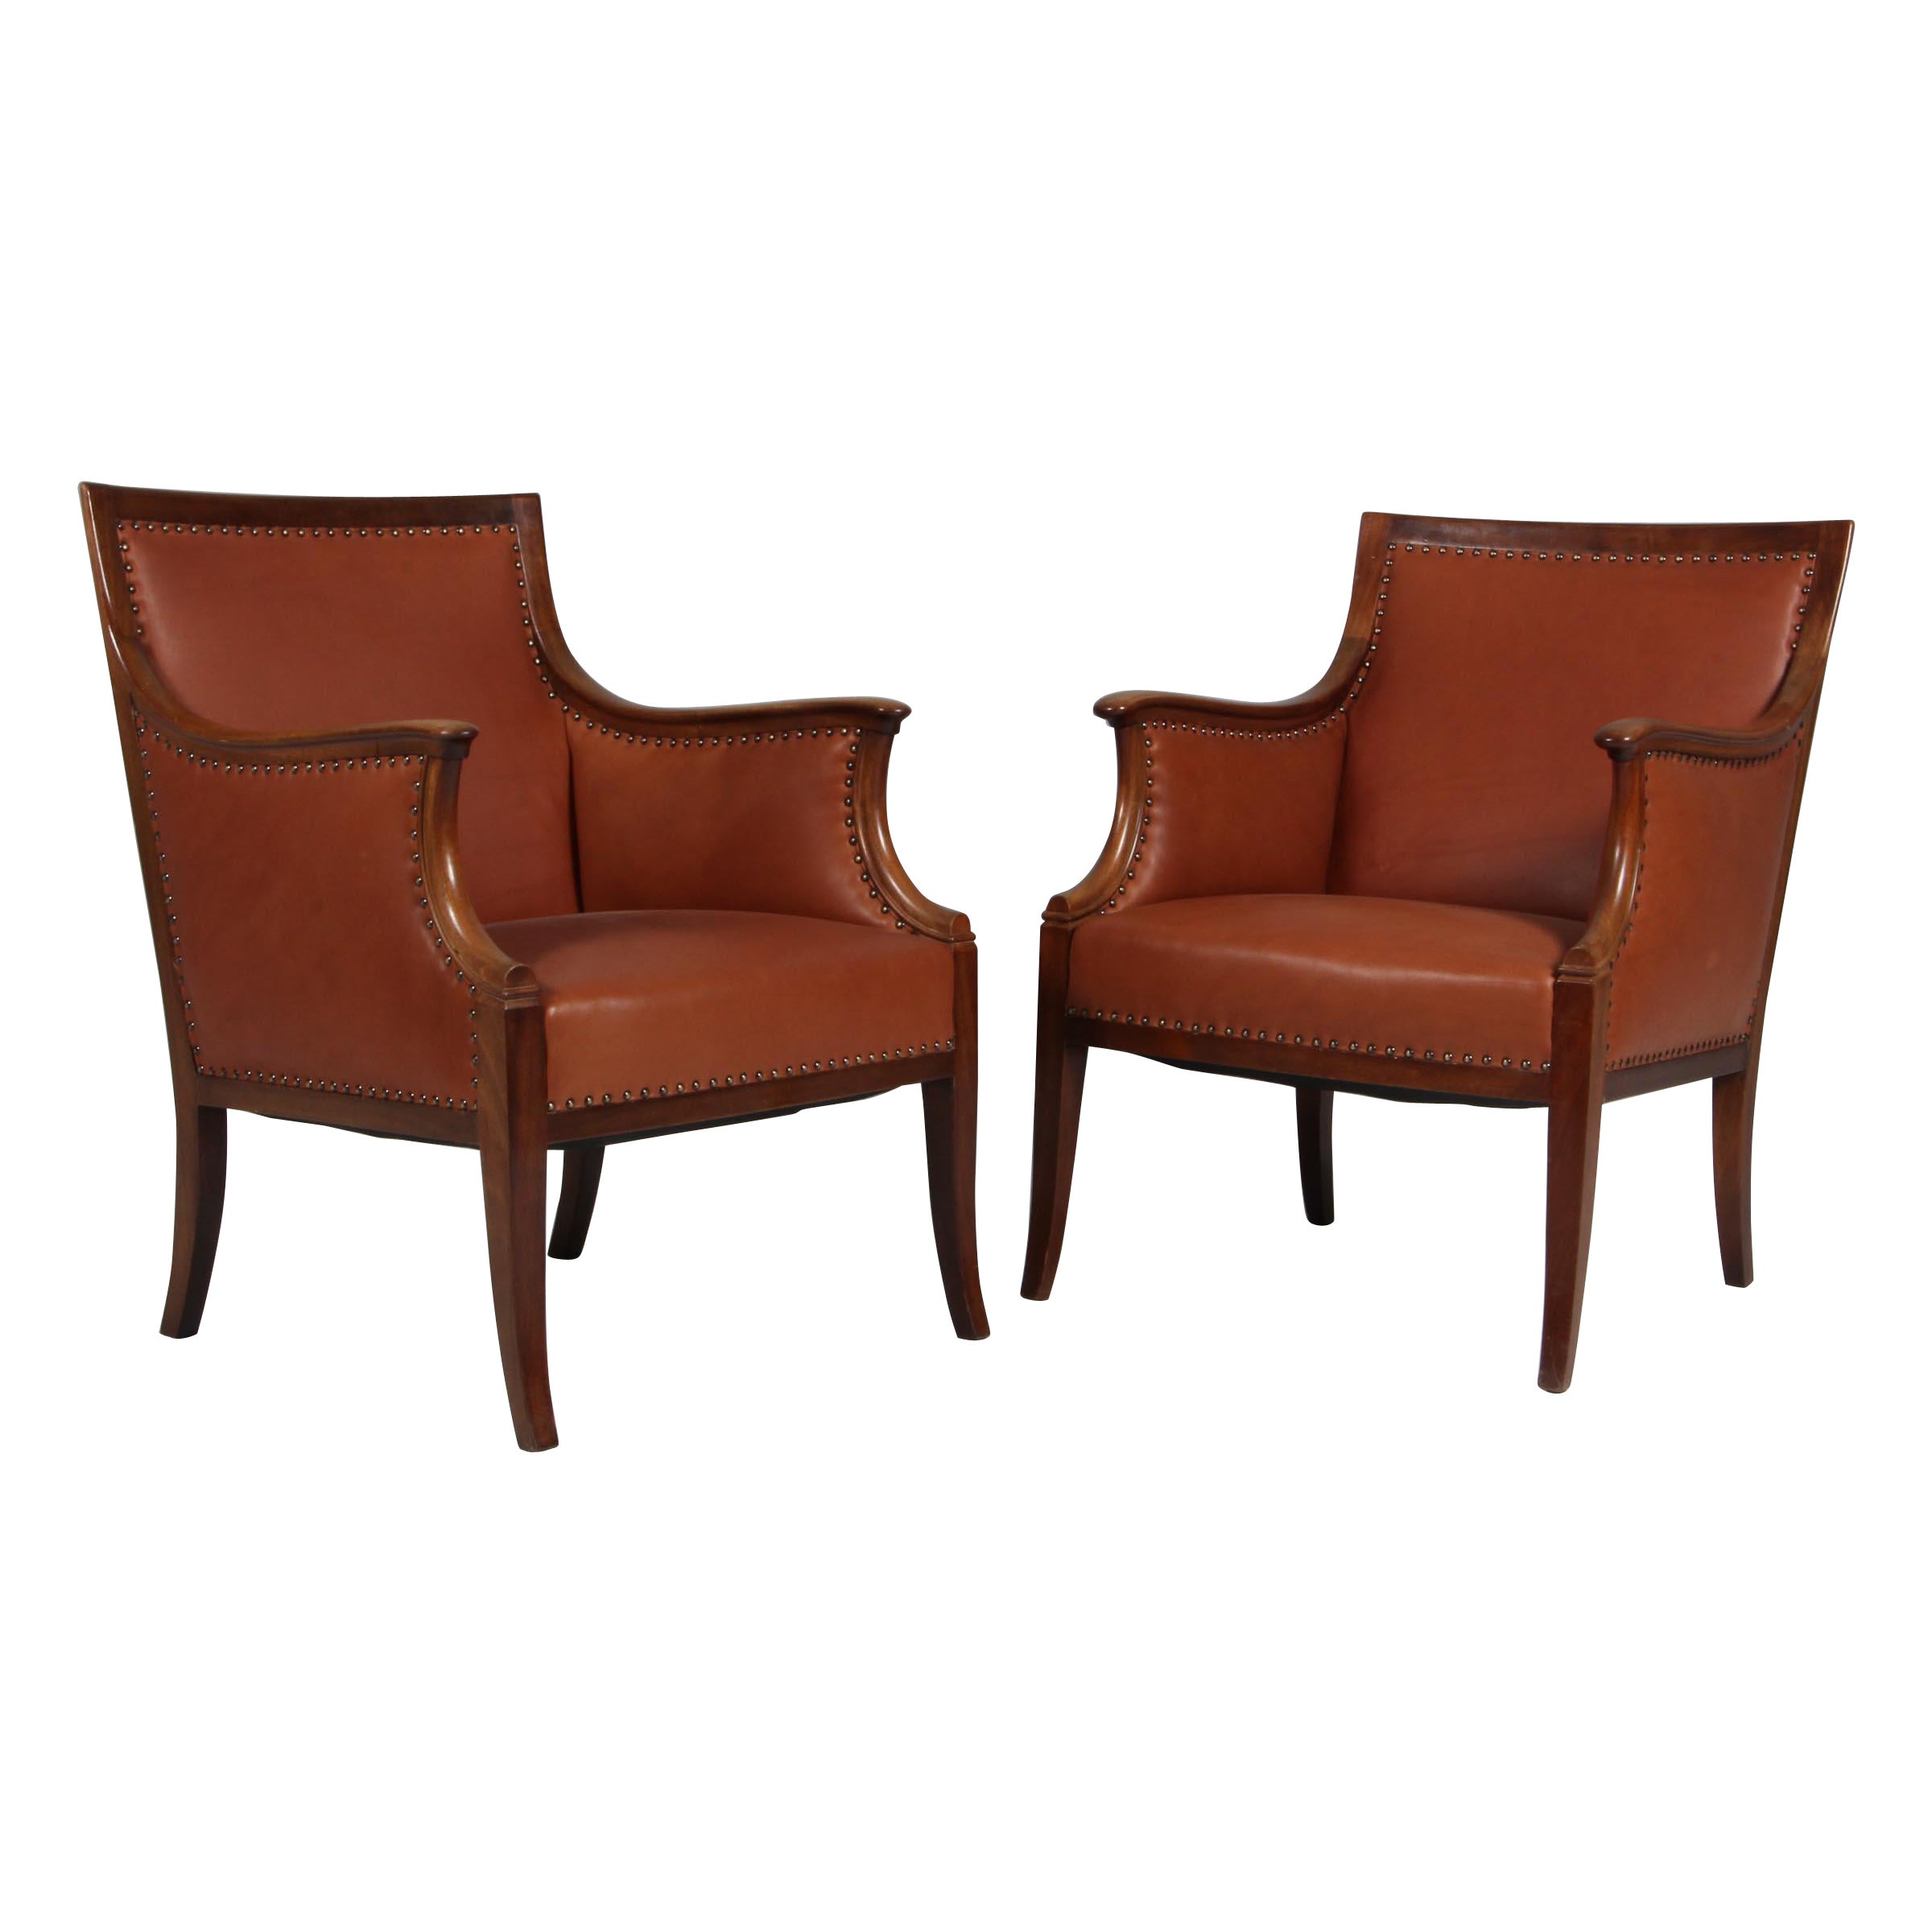 Frits Henningsen, Pair of Lounge Chairs with Brandy Aniline Leather For Sale